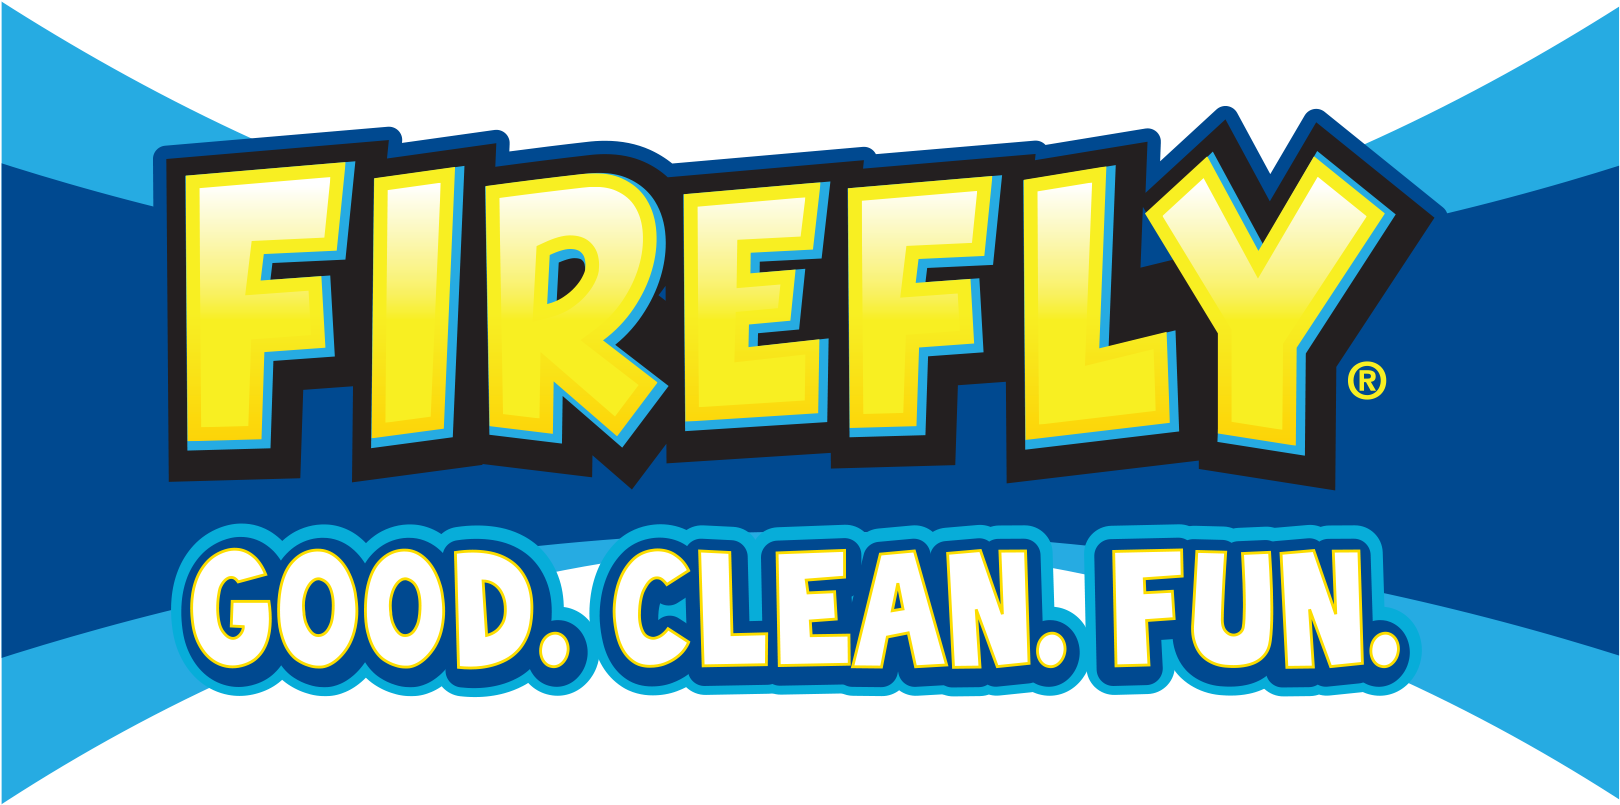 View Larger - Firefly Oral Care (1675x856)